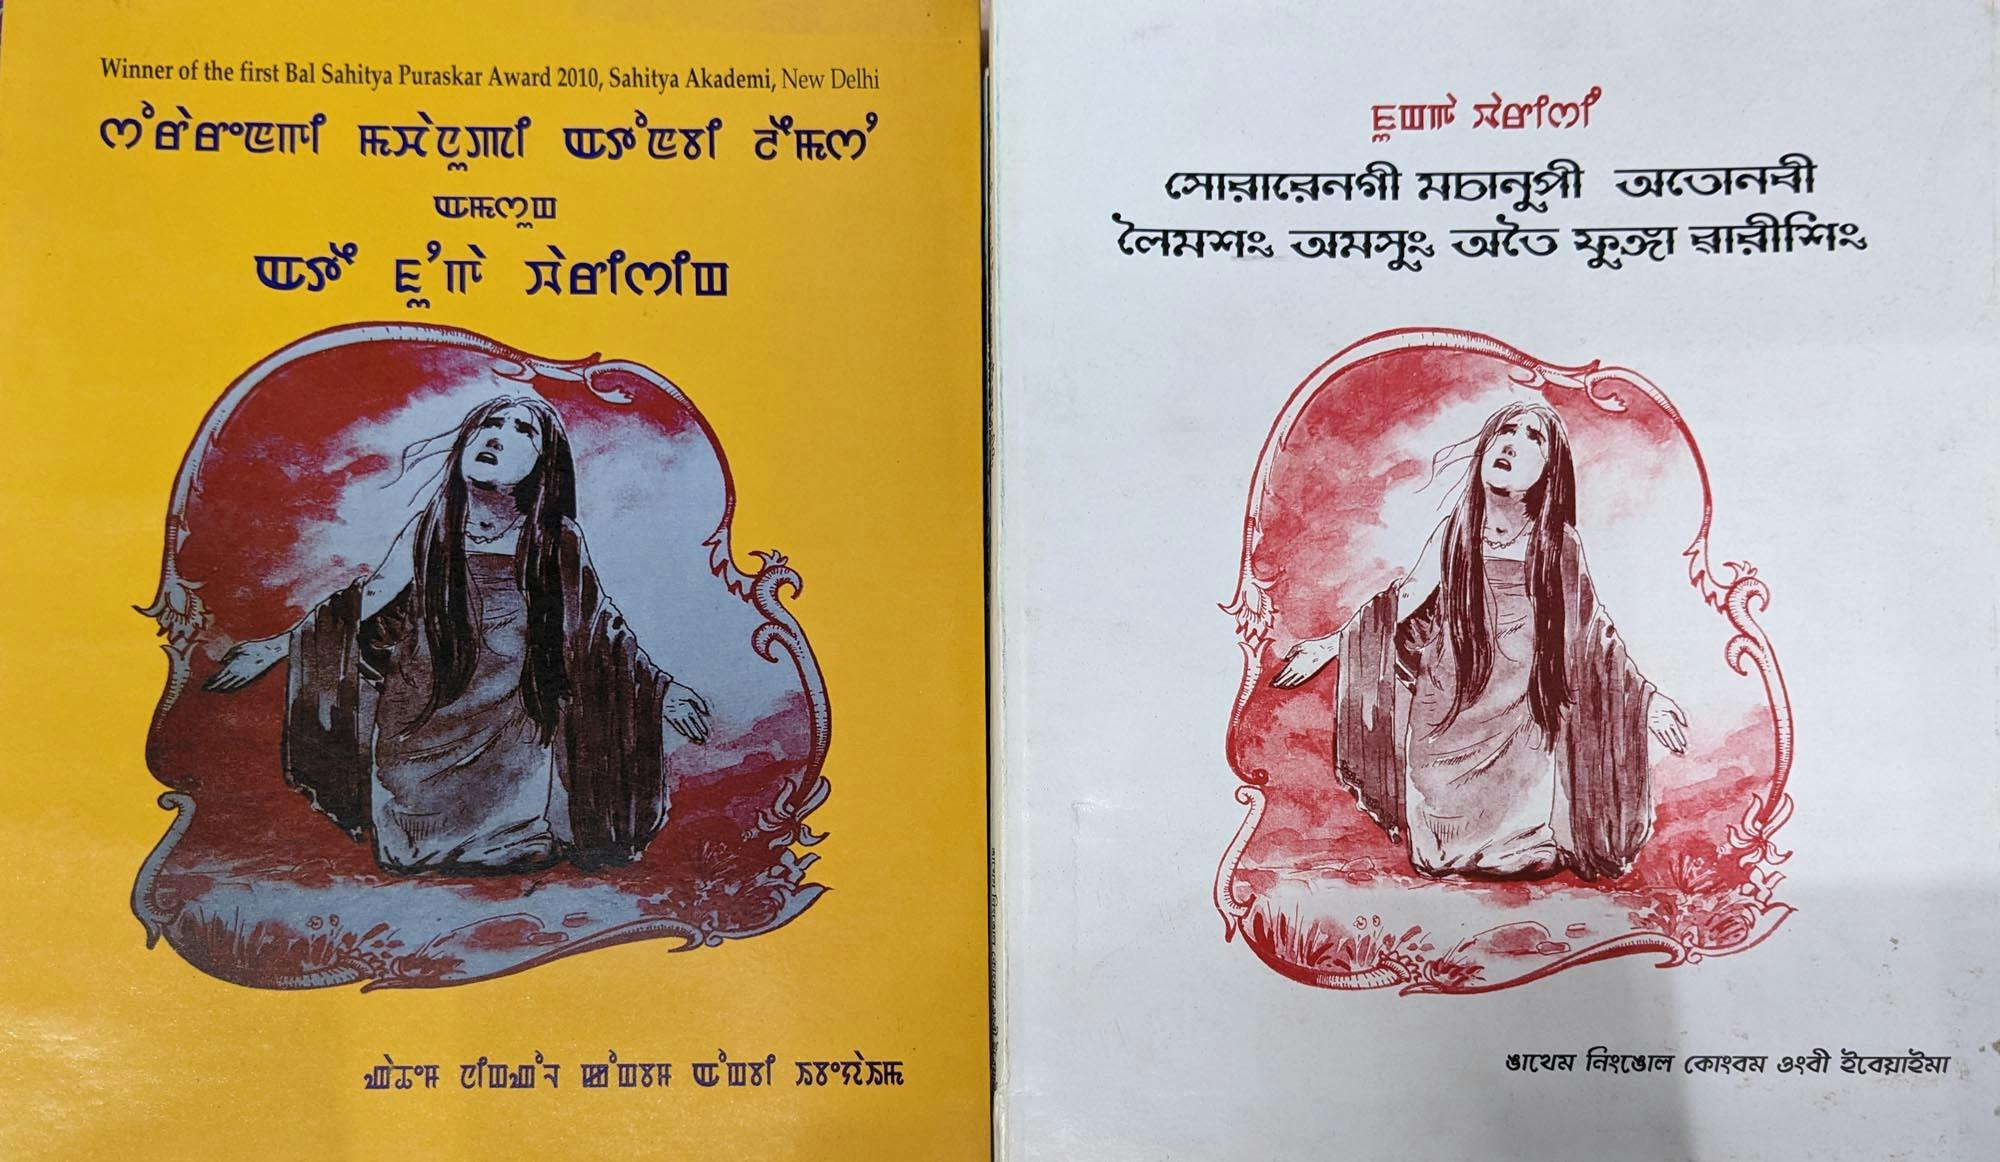 Two editions of the same book